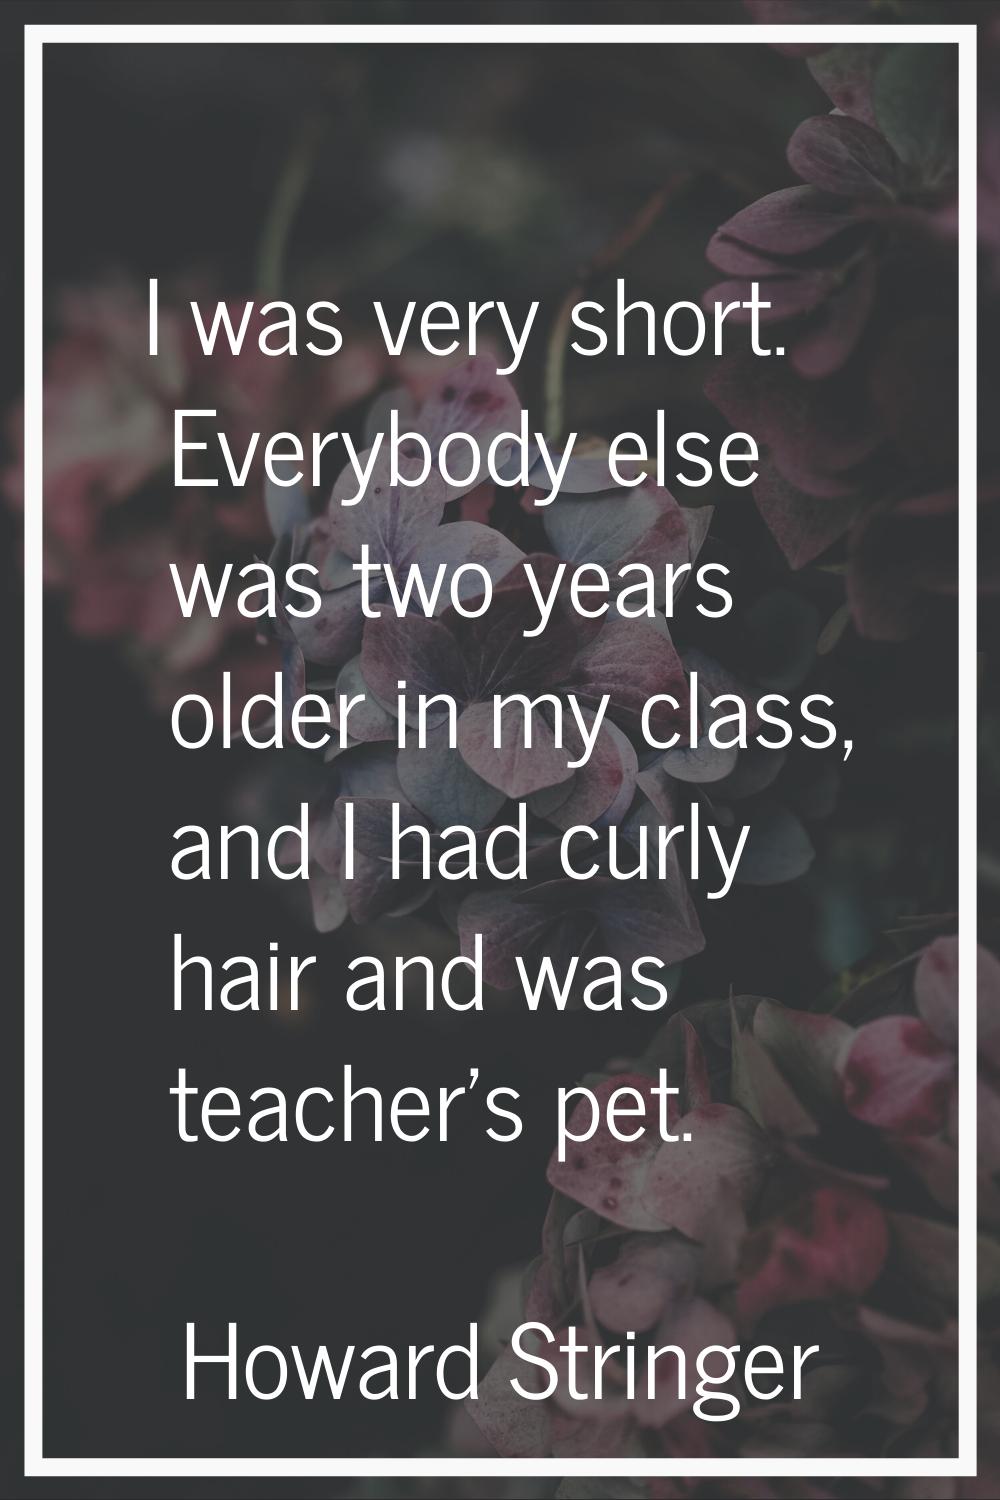 I was very short. Everybody else was two years older in my class, and I had curly hair and was teac